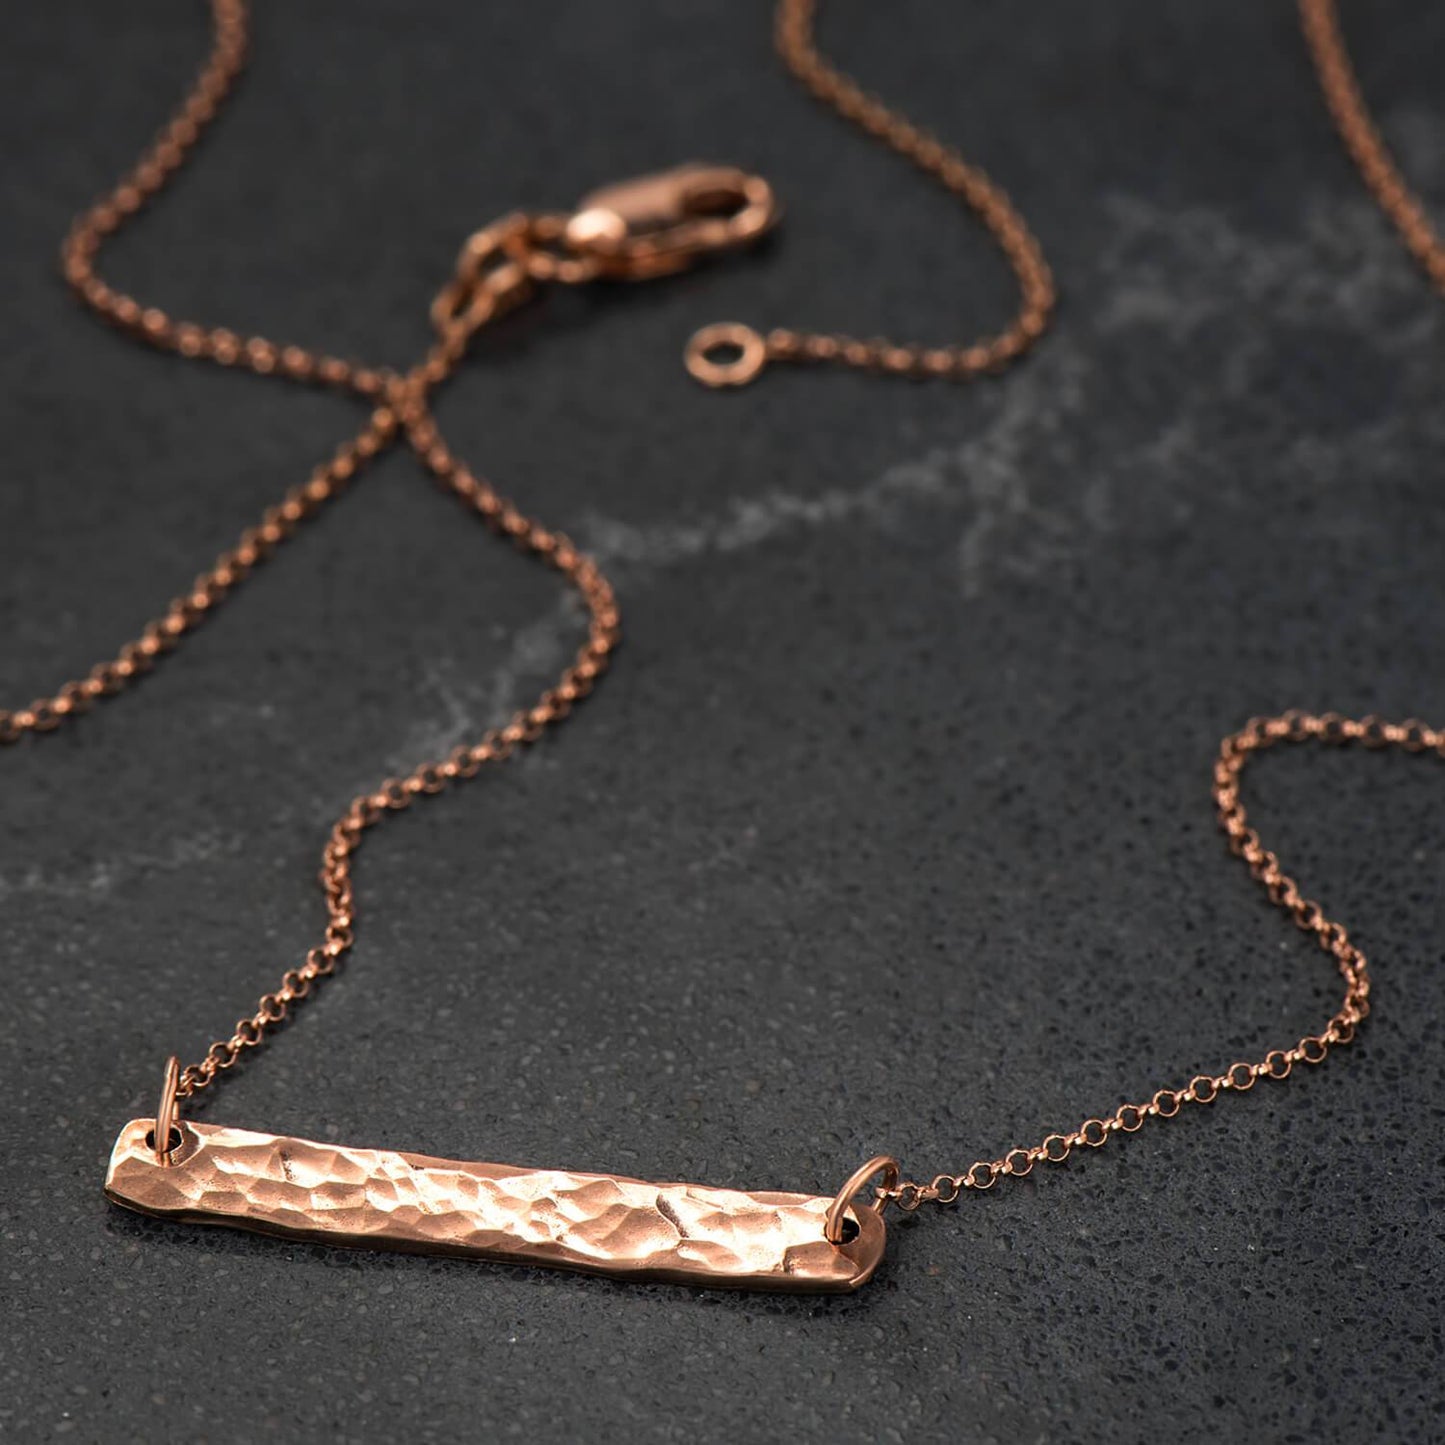 10 karat recycled rose gold hammer finished bar pendant brought to a polished finish with a 19" rolo chain